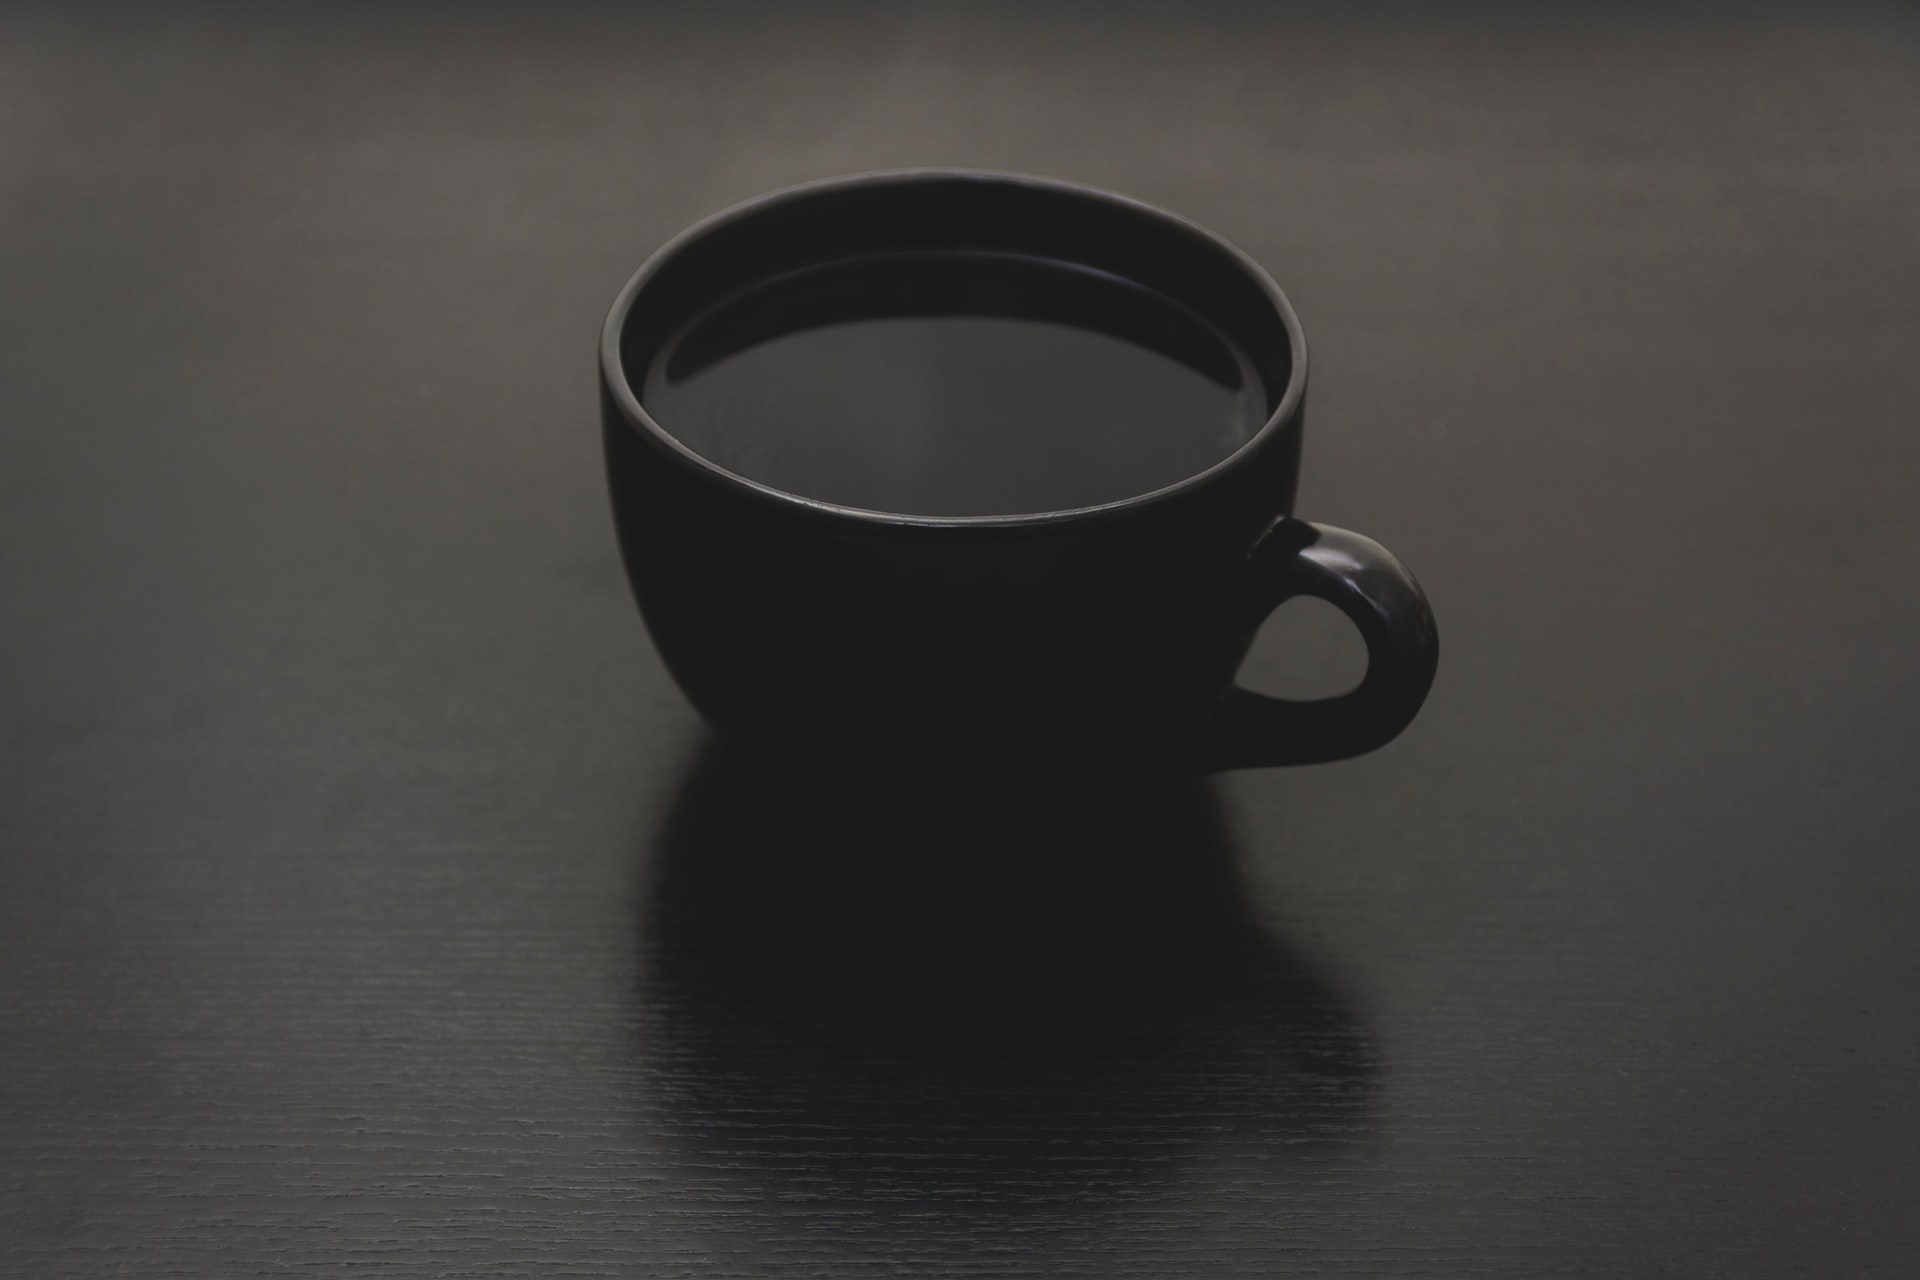 A cup of black coffee in a black mug on a black table